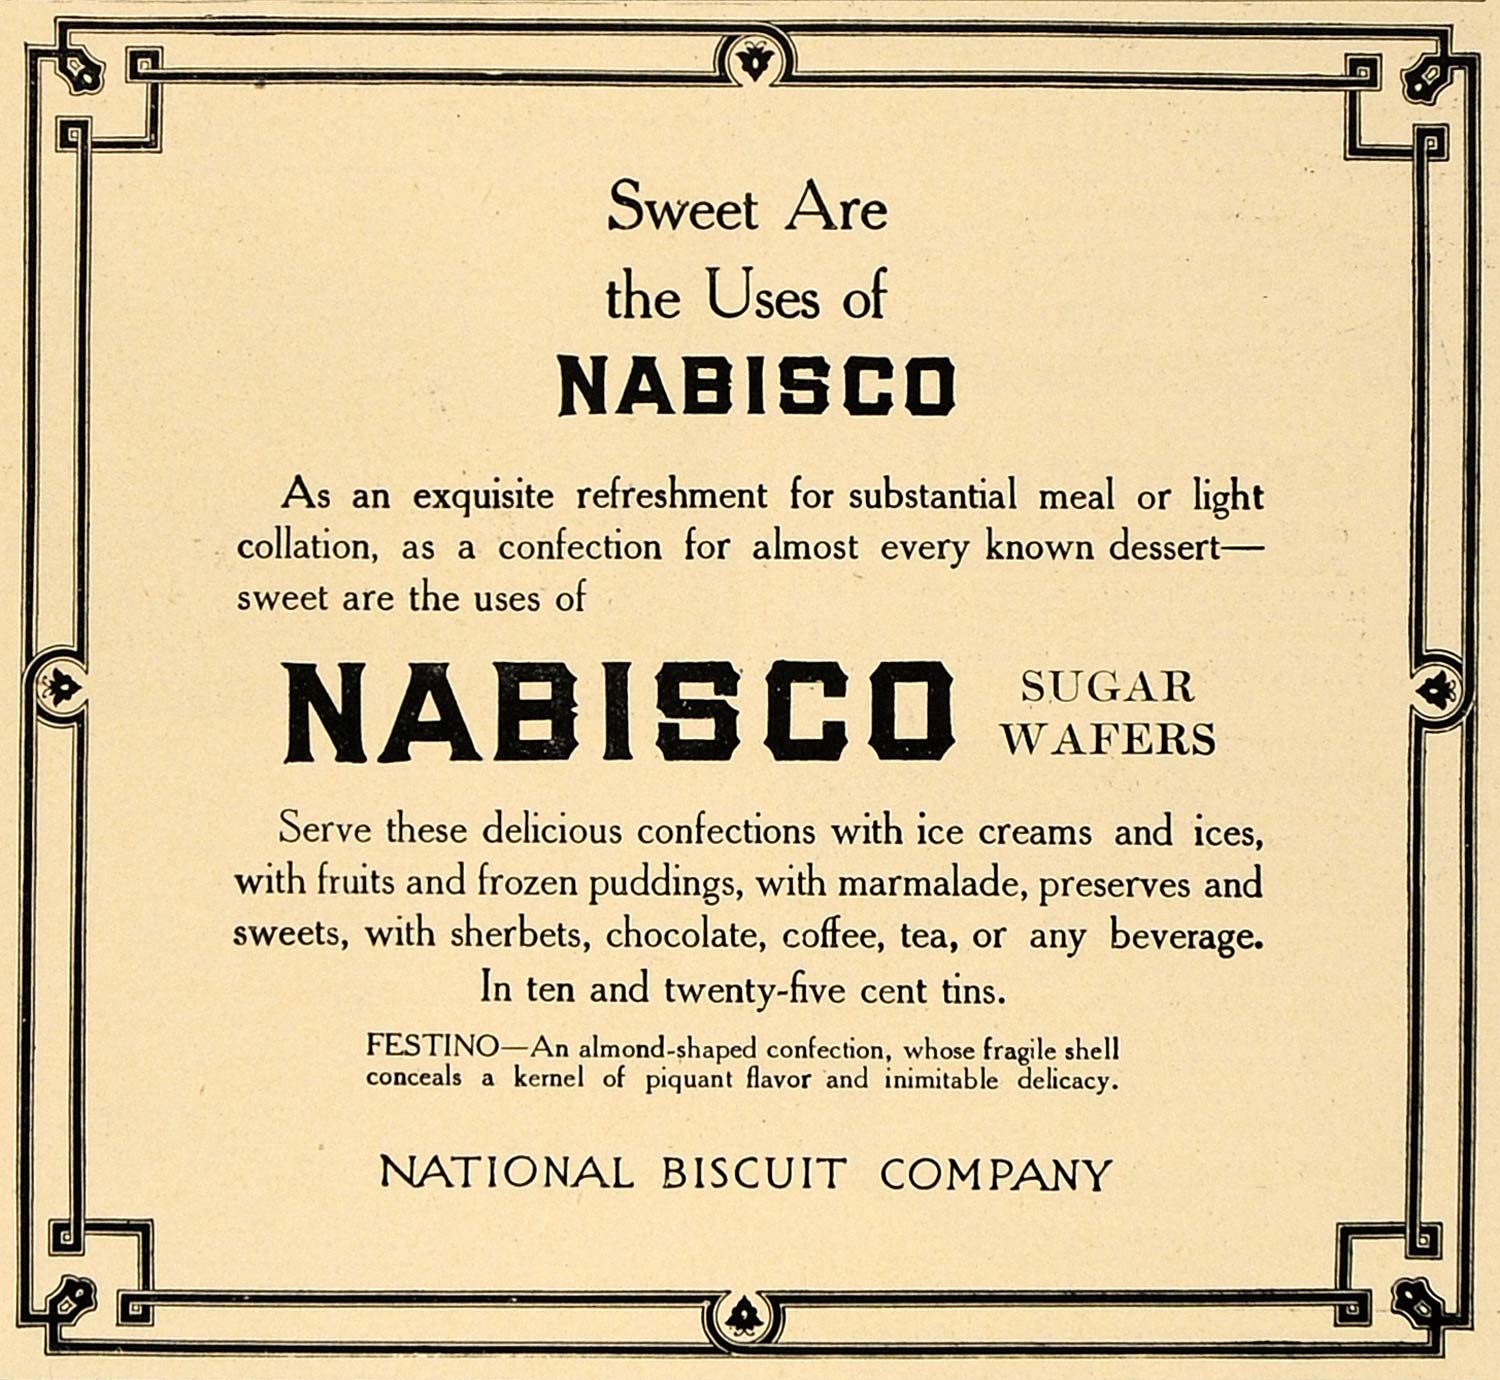 1906 Ad National Biscuit Nabisco Sugar Wafers Sweets Advertising Original CL8